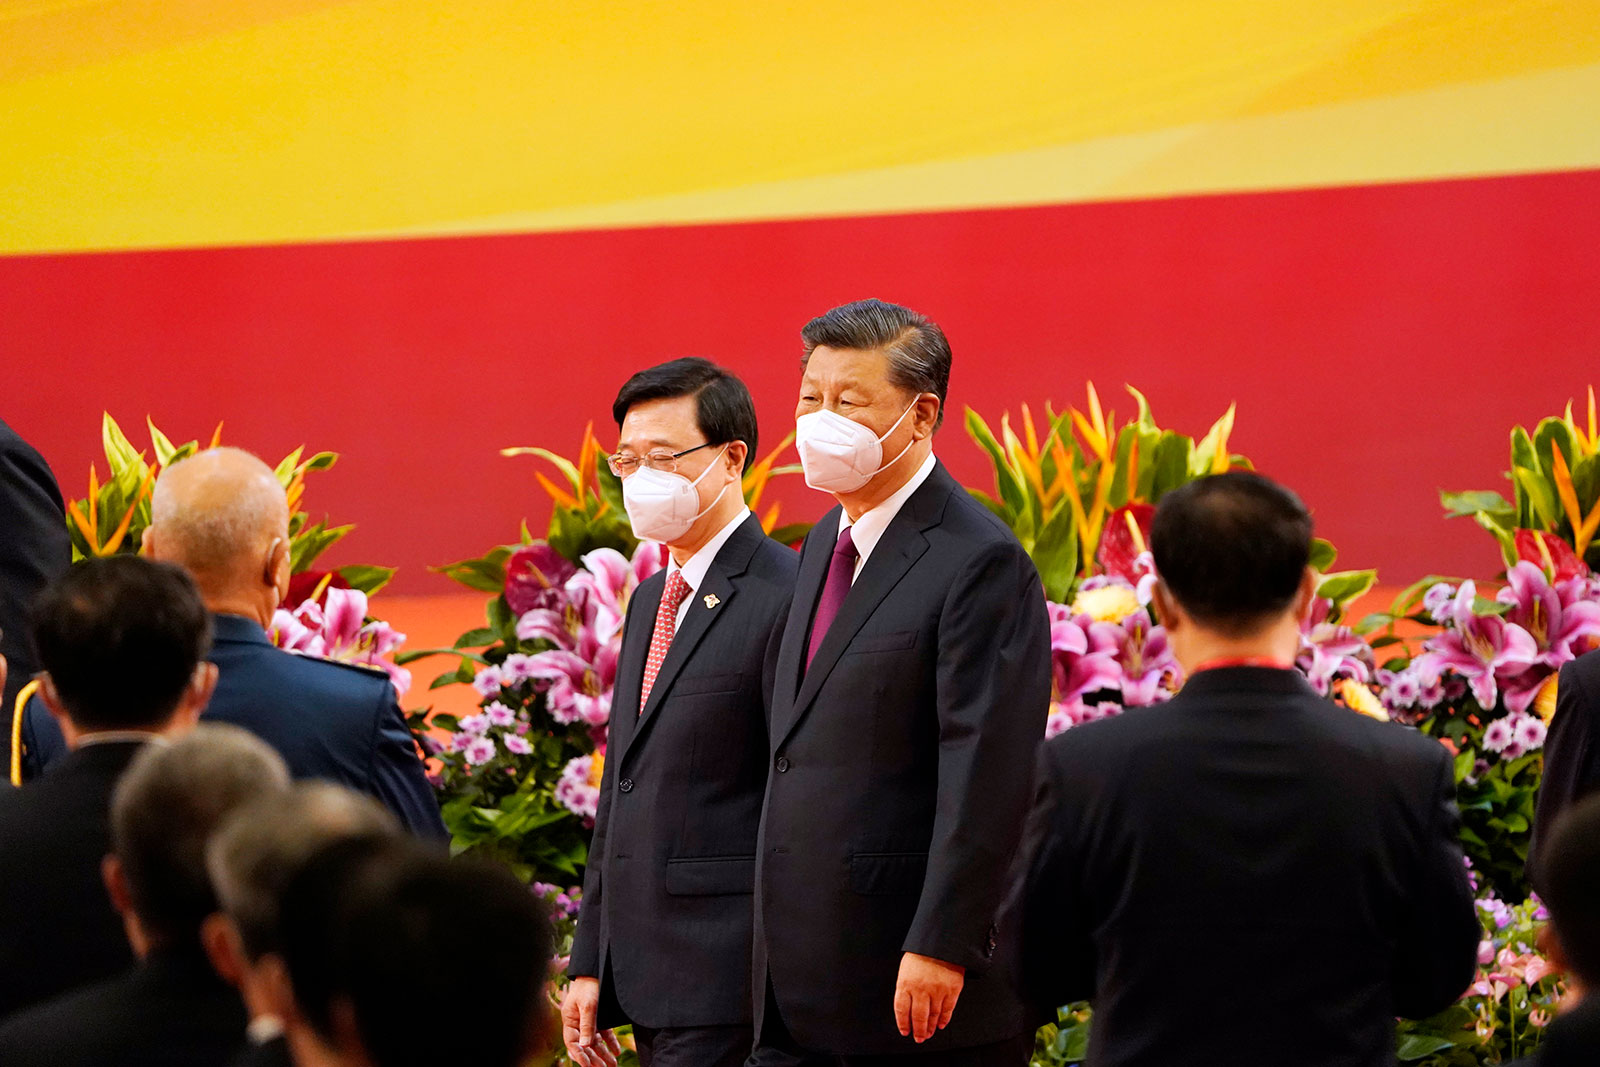 Chinese leader Xi Jinping arrives at a swearing-in ceremony for Hong Kong's new Chief Executive John Lee, left, in Hong Kong on Friday, July 1.